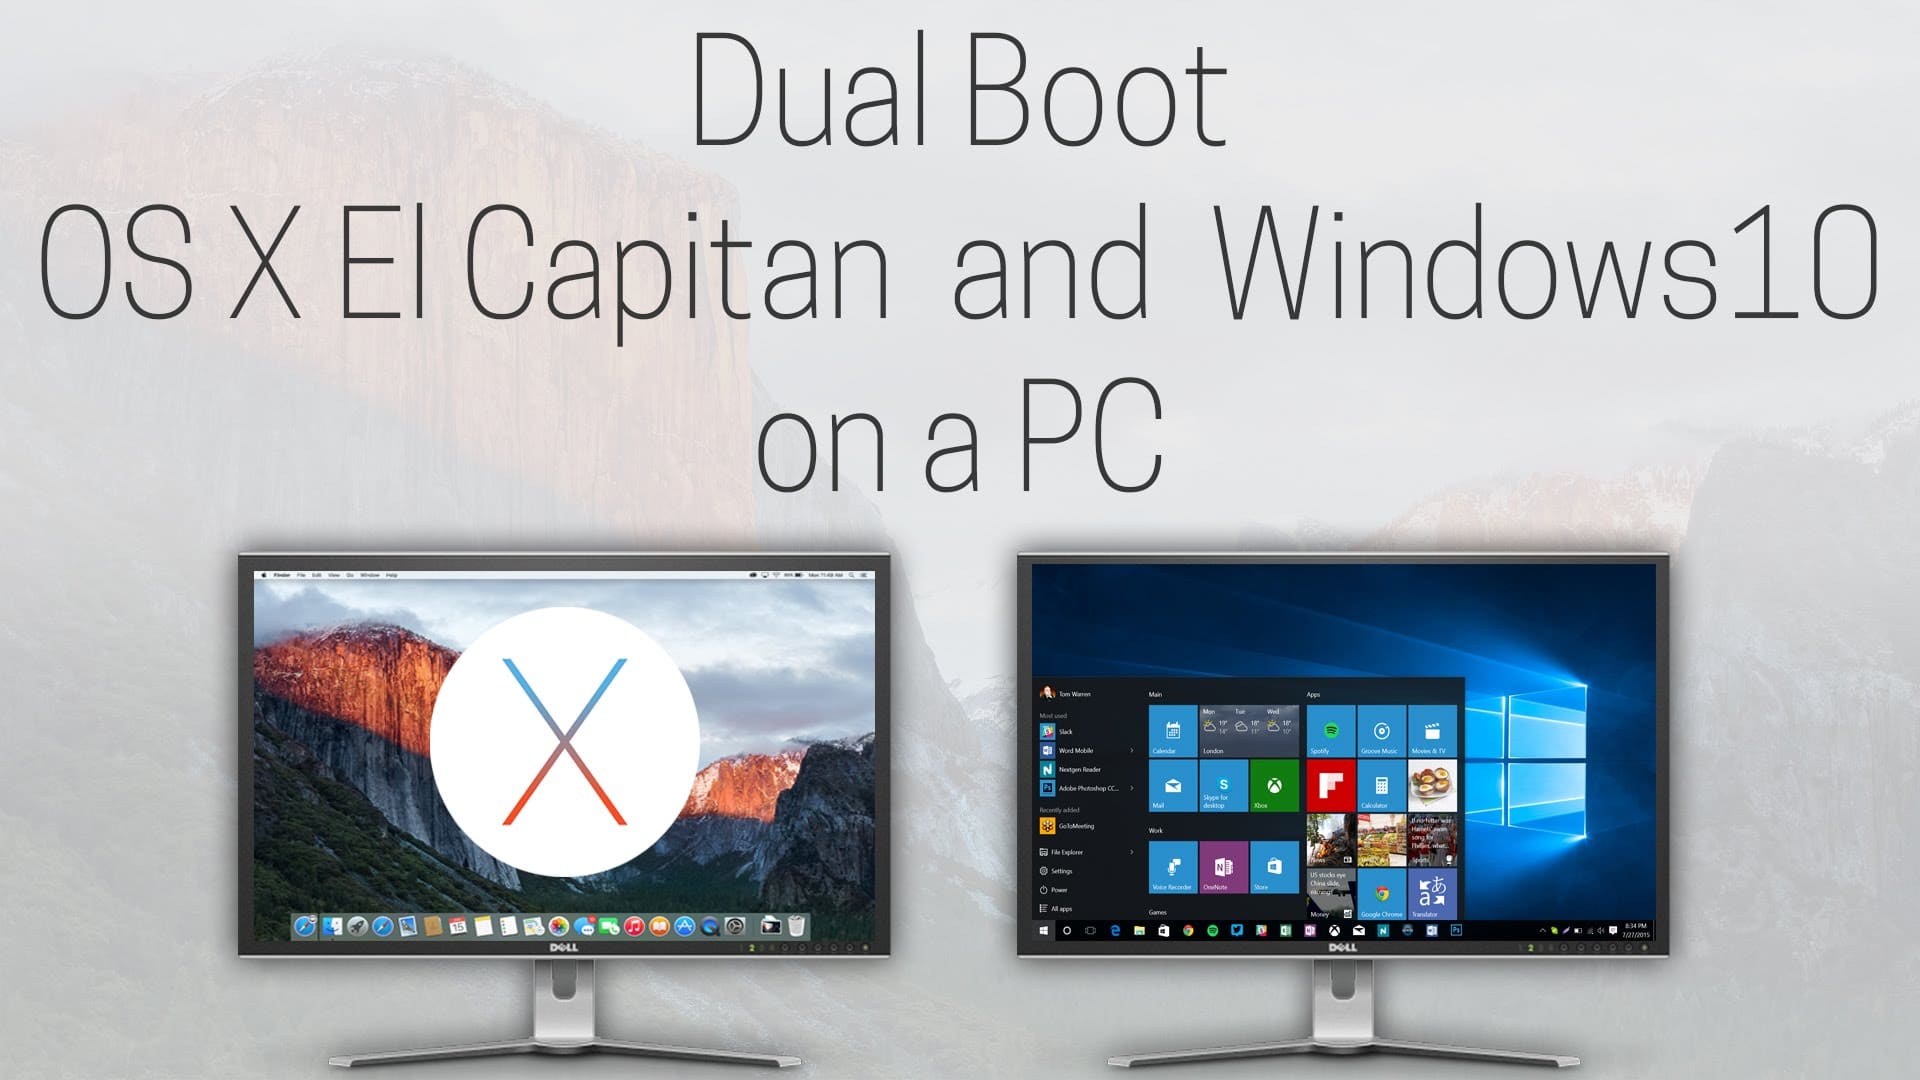 dhow to dual boot mac with windows 10